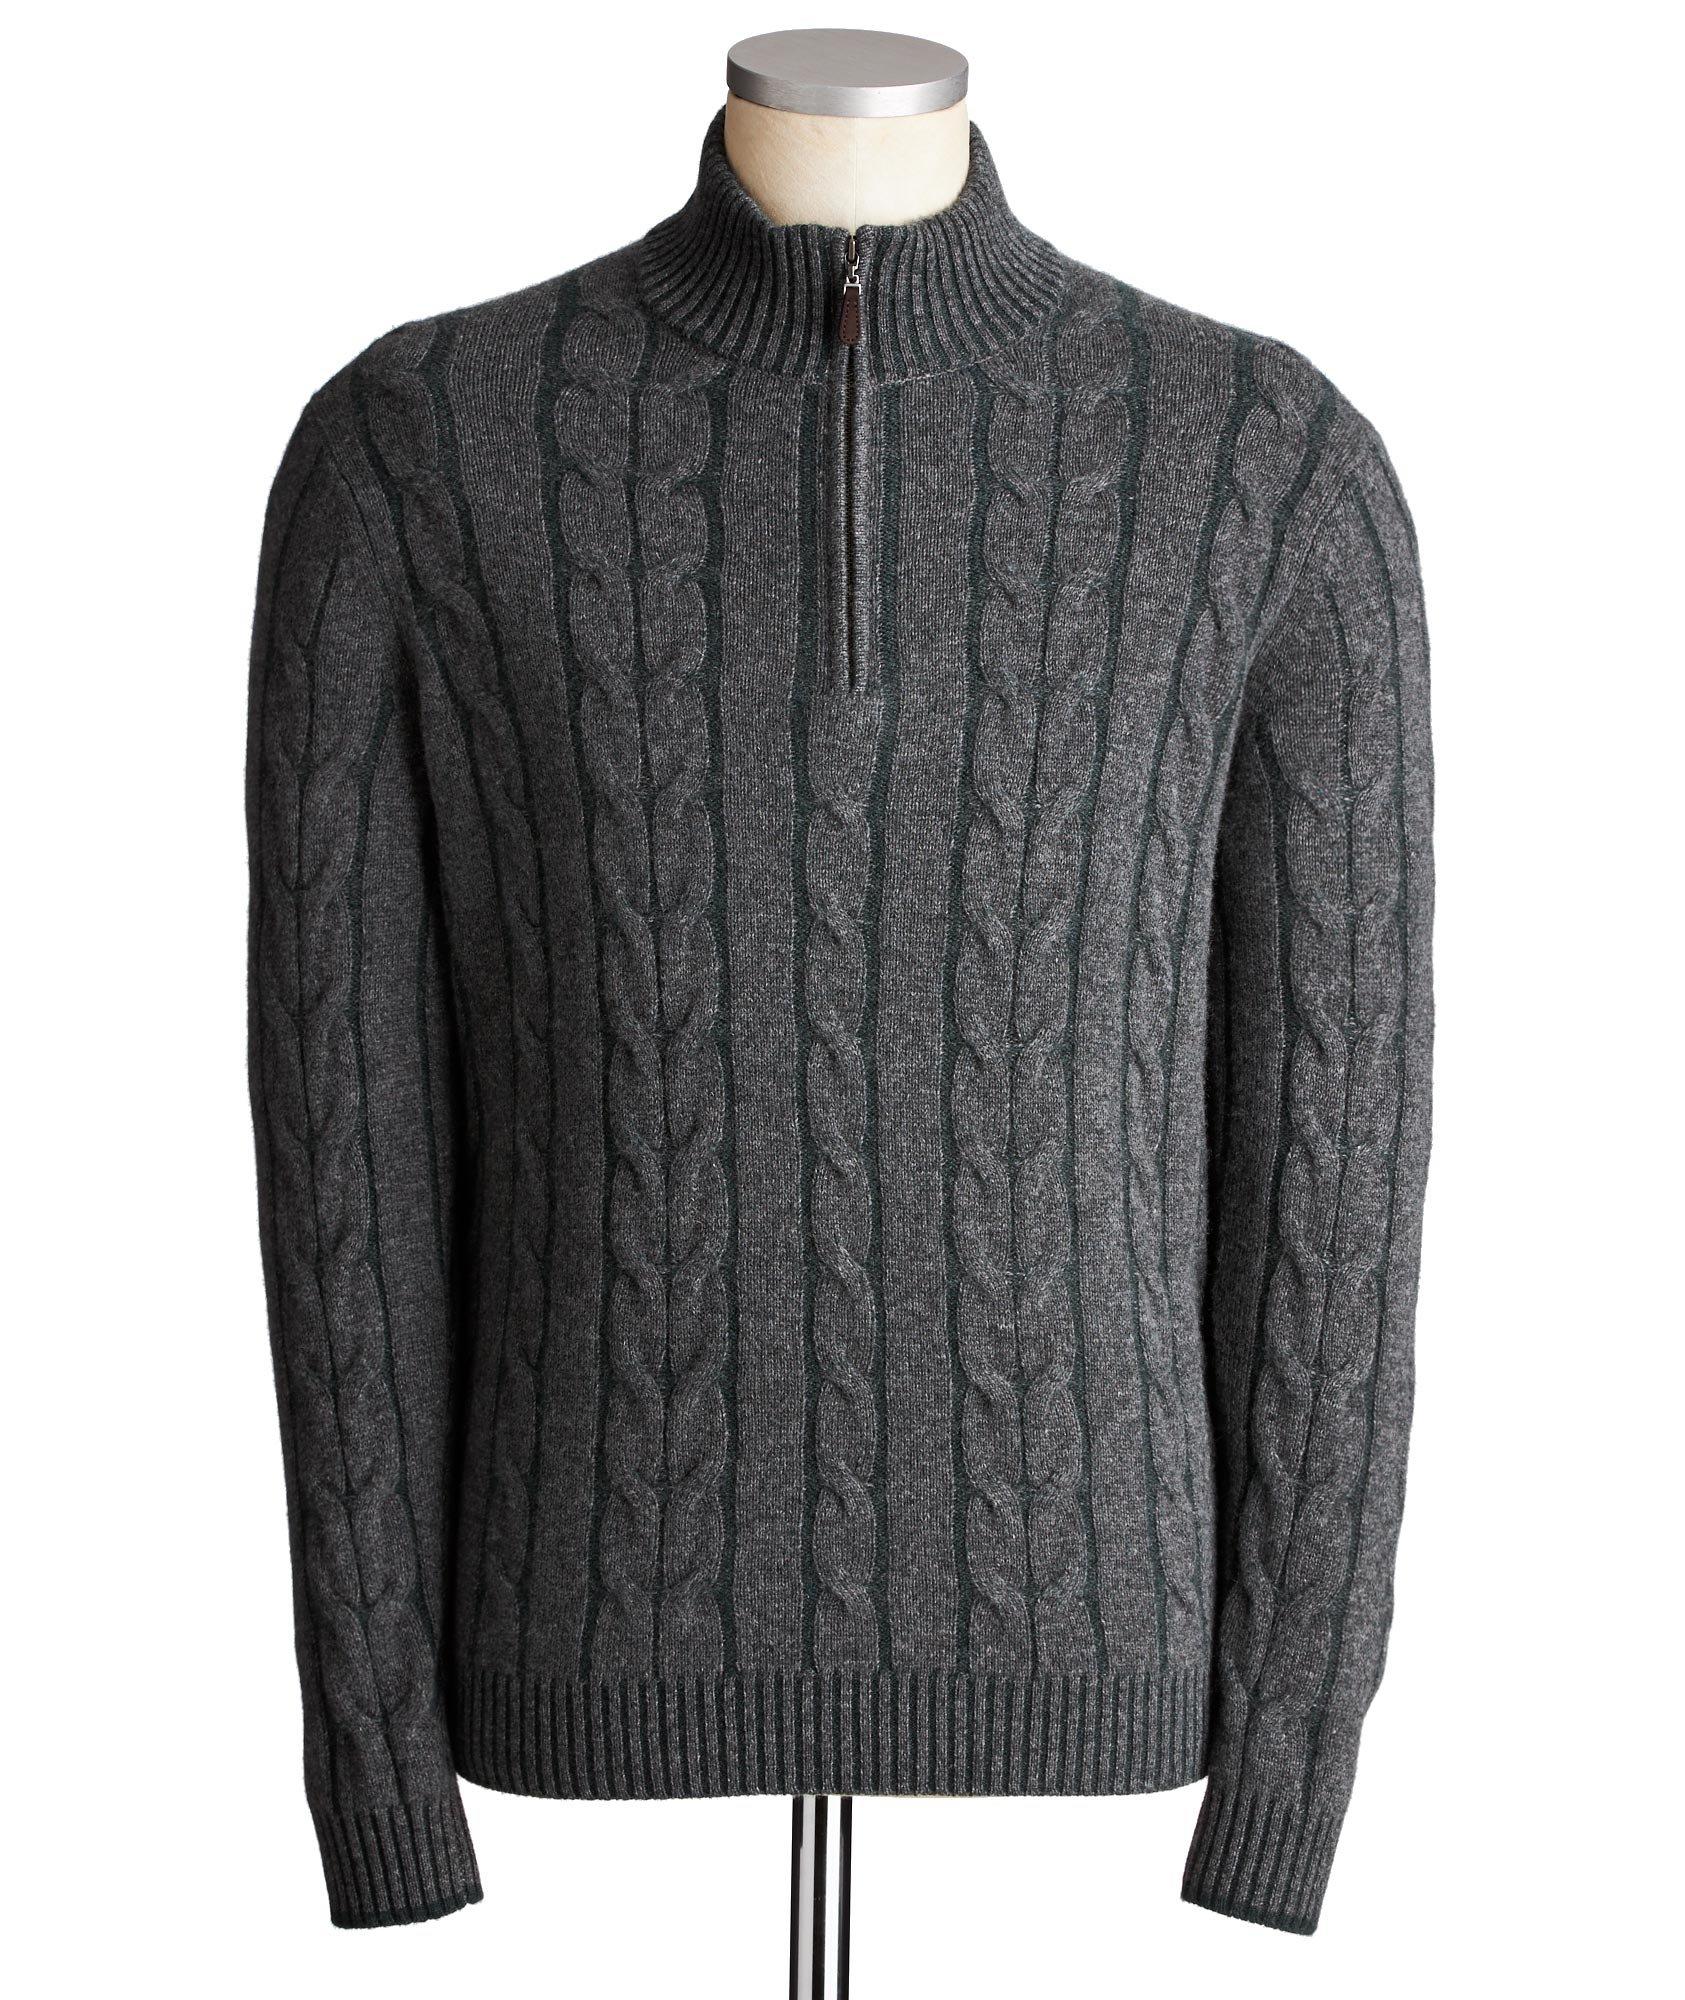 Half-Zip Cable Knit Cashmere Sweater image 0